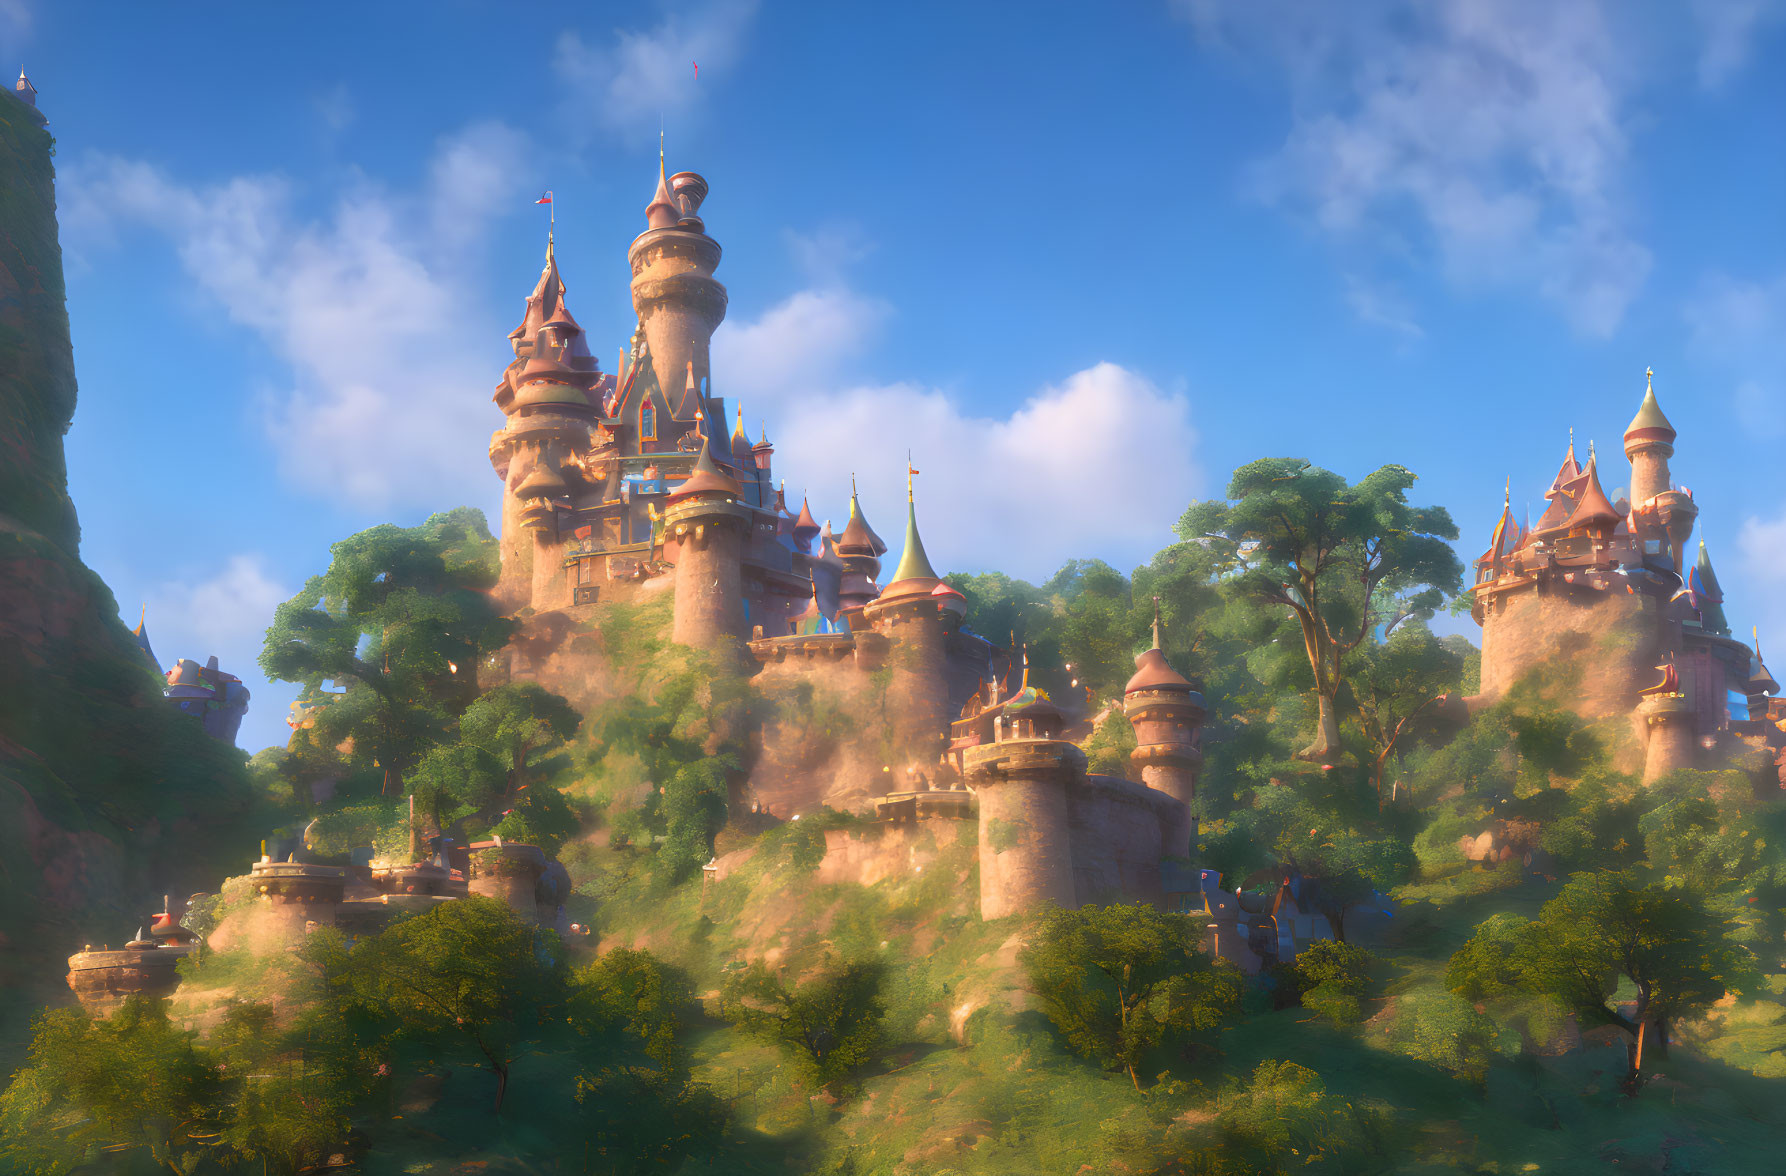 Majestic castle with spires on green hills in sunlight